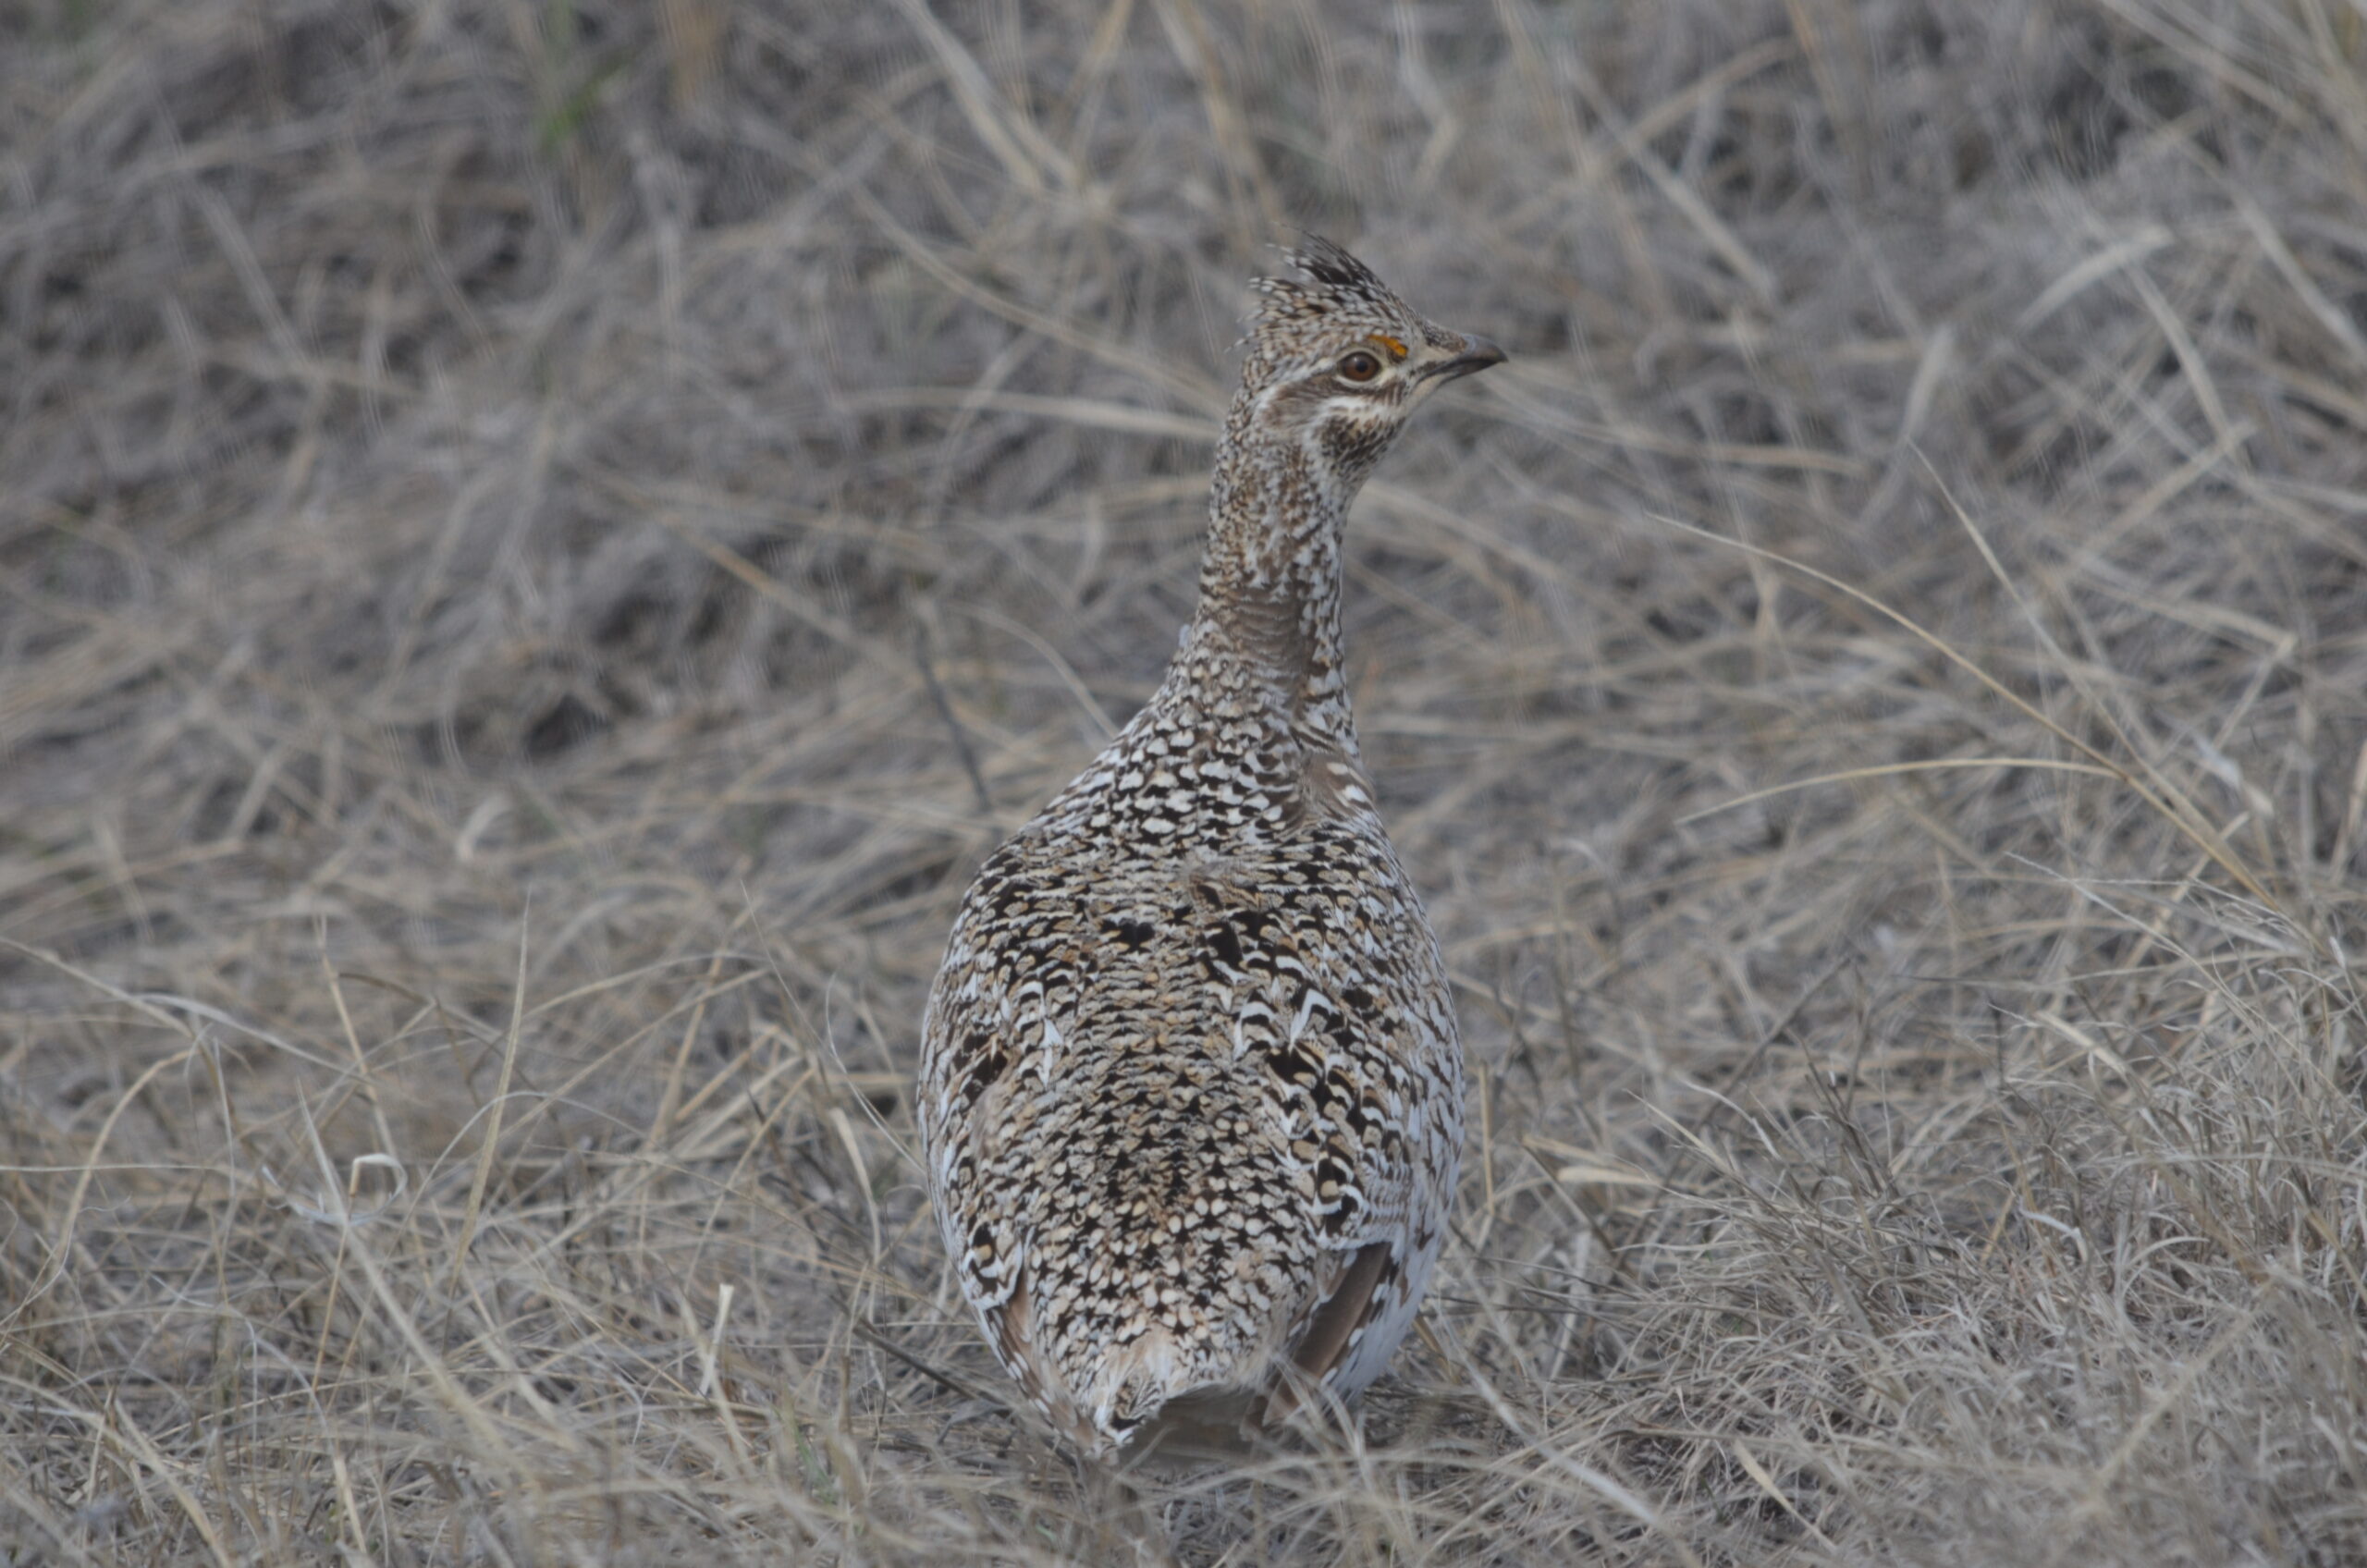 a sharp-tailed grouse stands alert, looking back over its shoulder toward the camera. It nearly blends in to the surrounding tan grasses